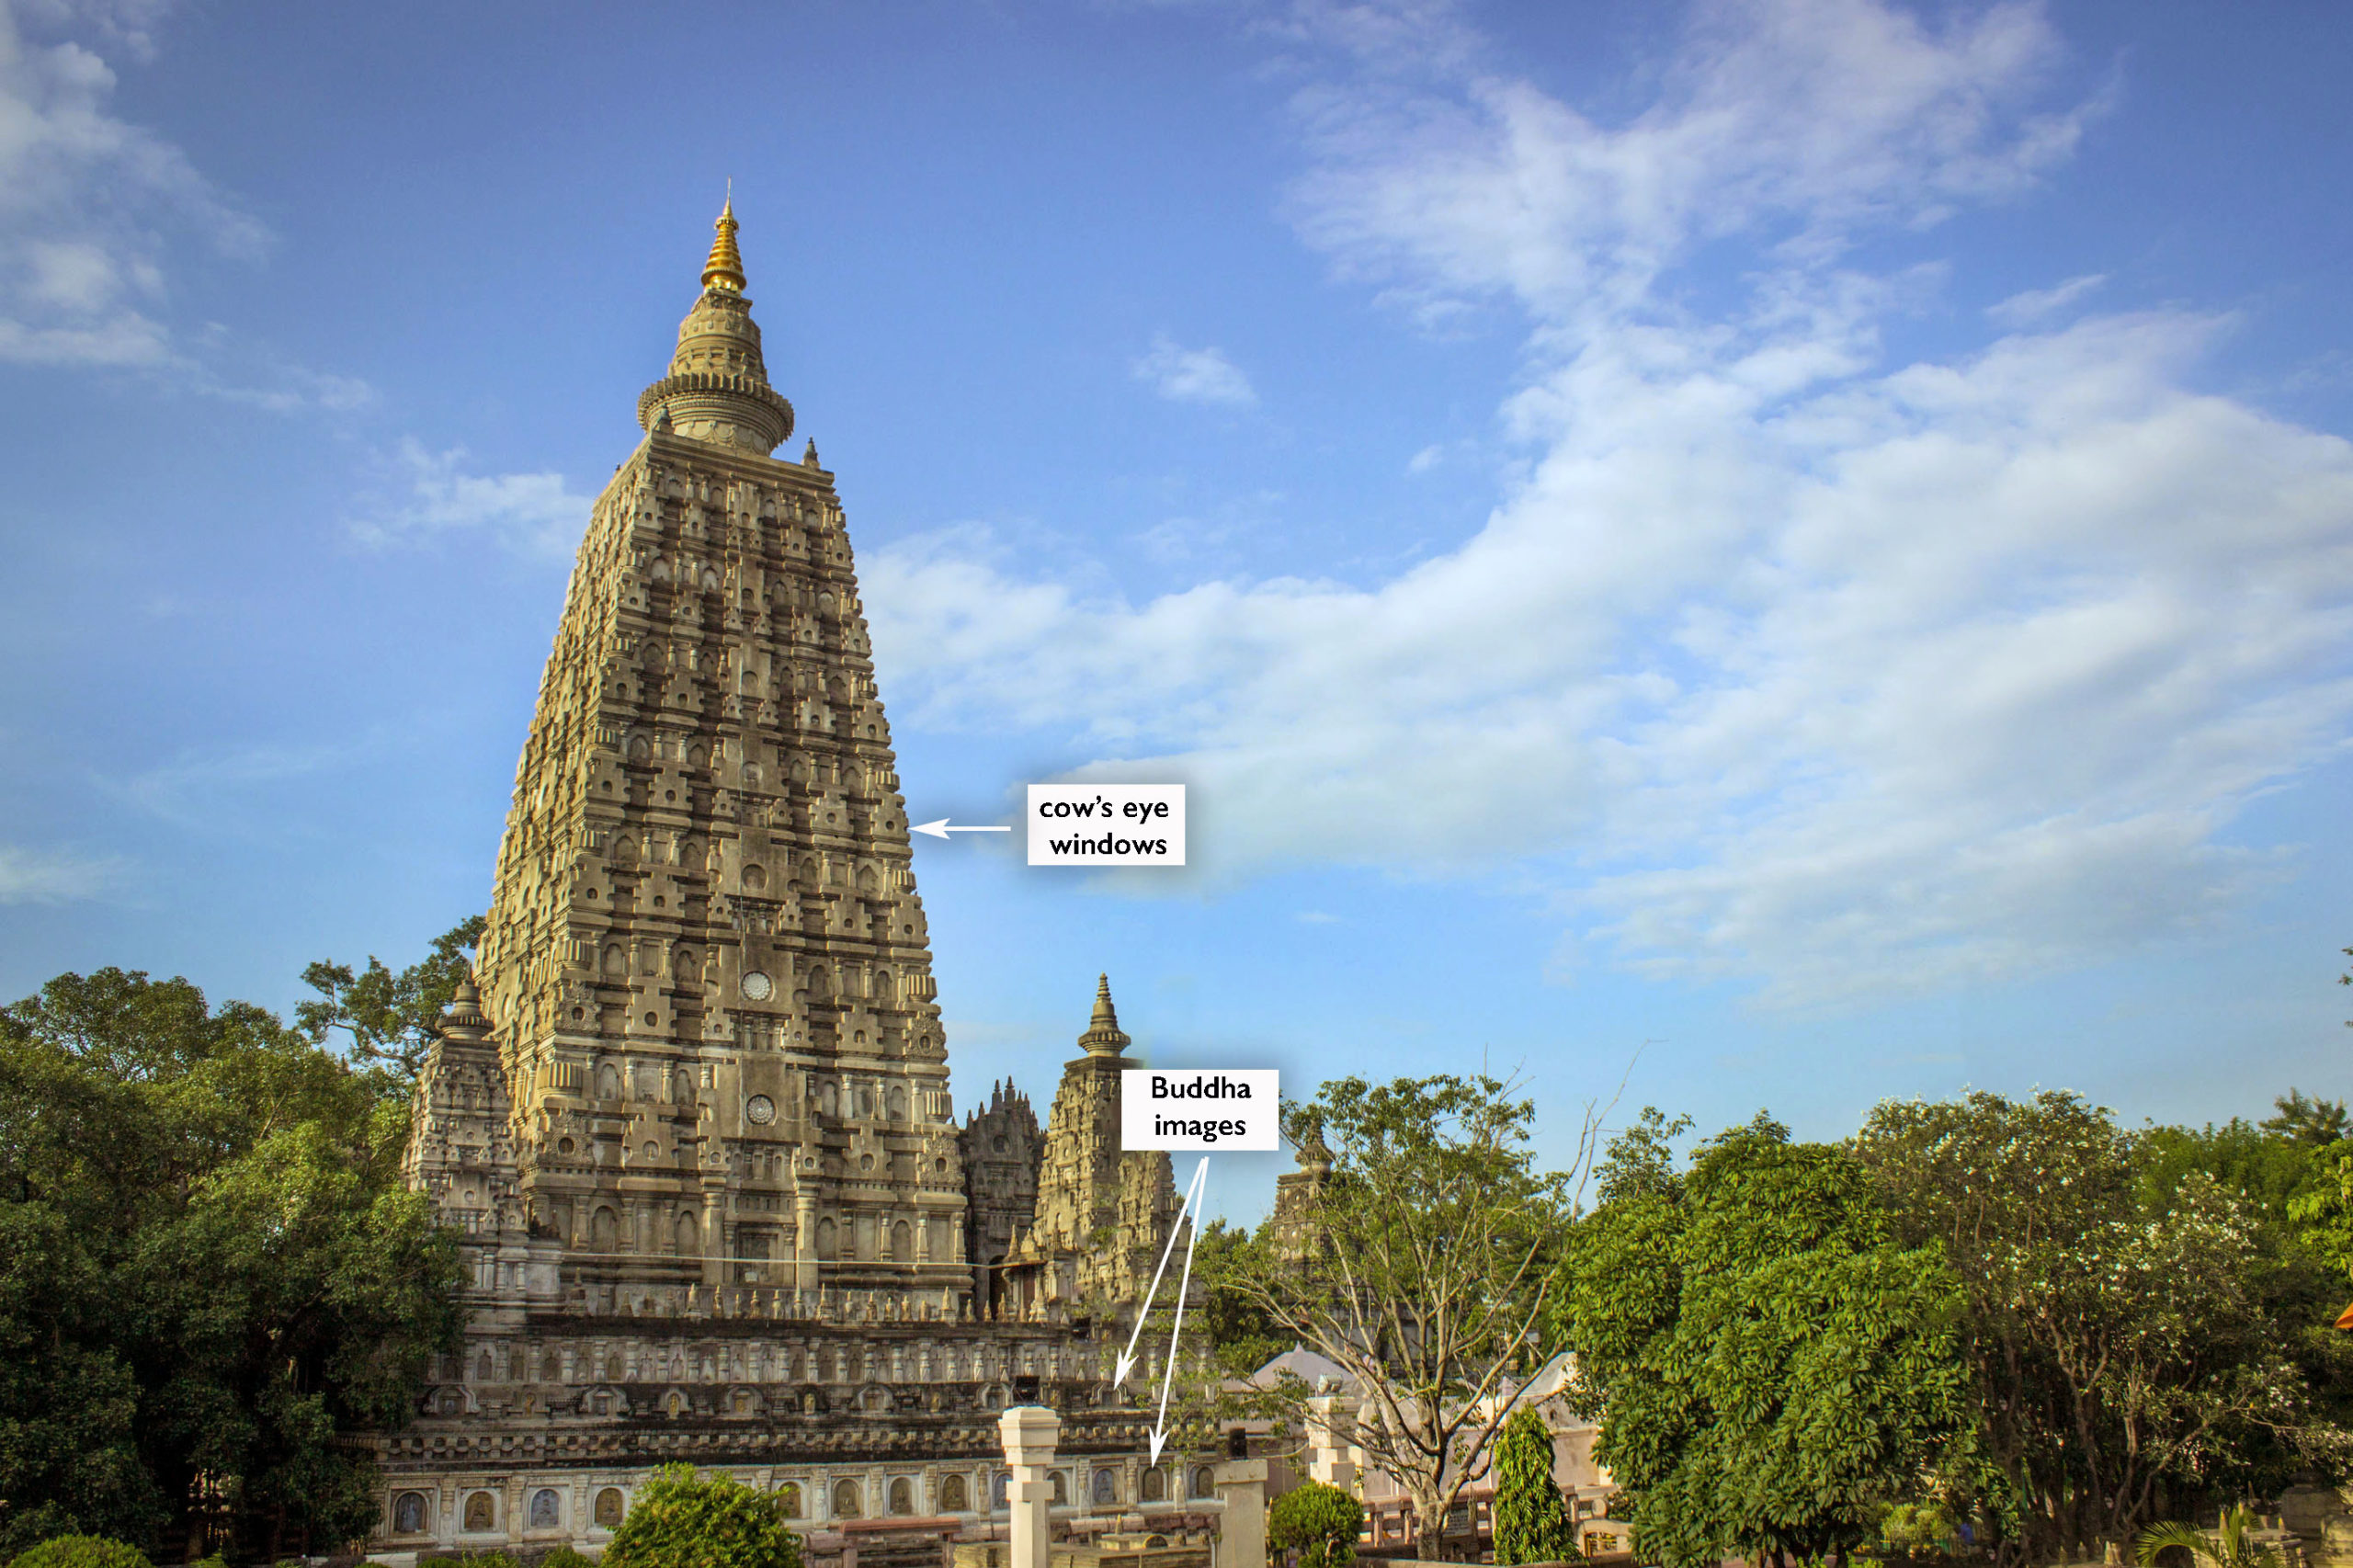 Bodh Gaya: The Site of the Buddha's Enlightenment